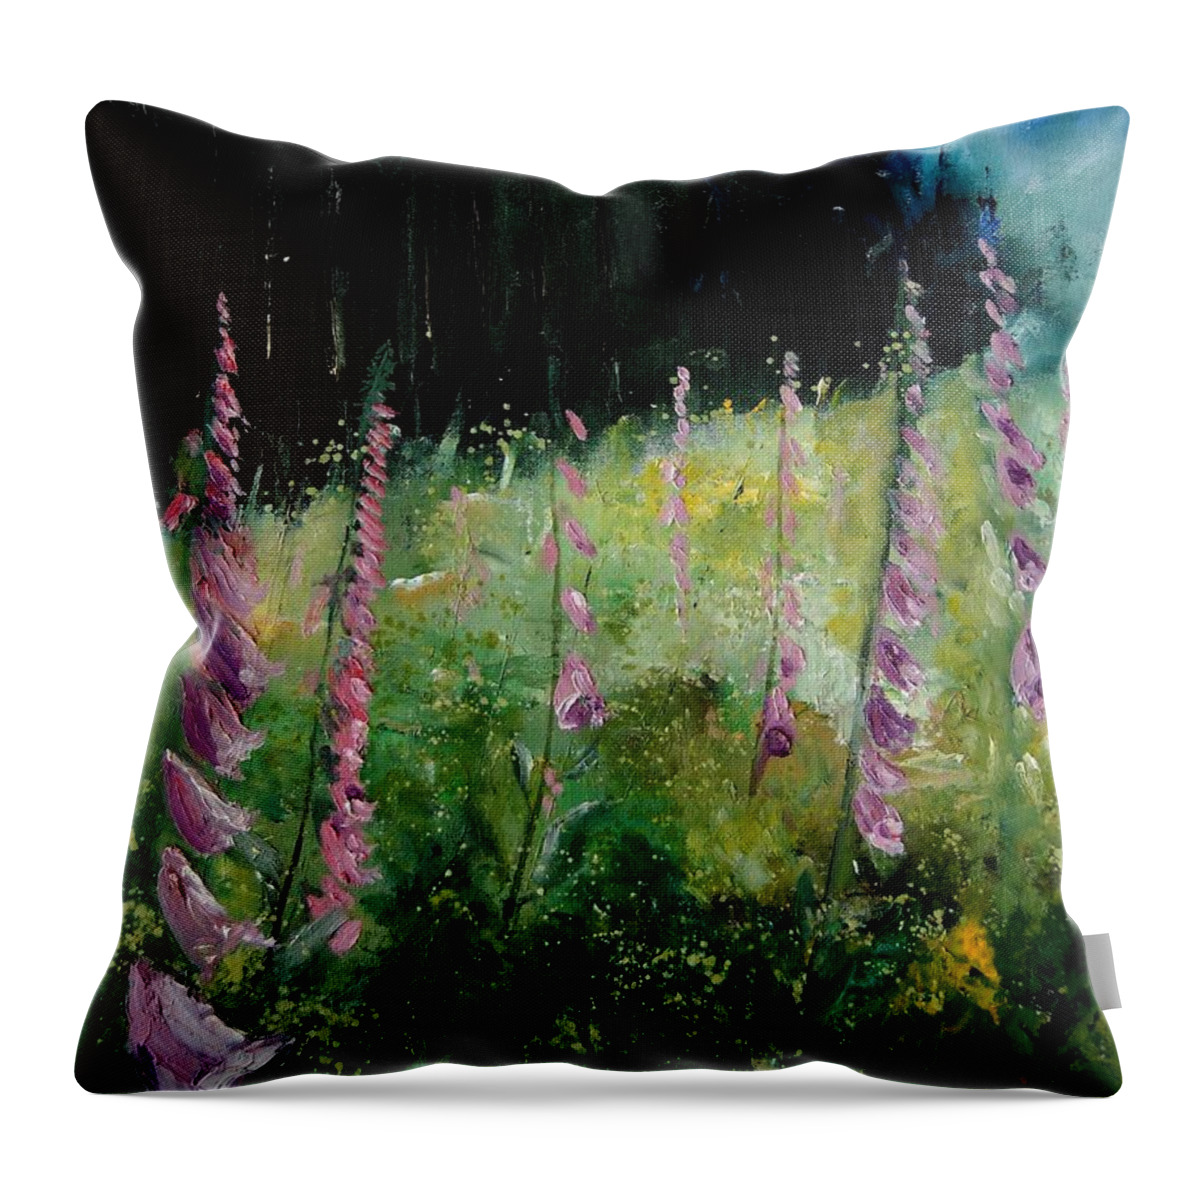 Flowers Throw Pillow featuring the painting Foxgloves by Pol Ledent